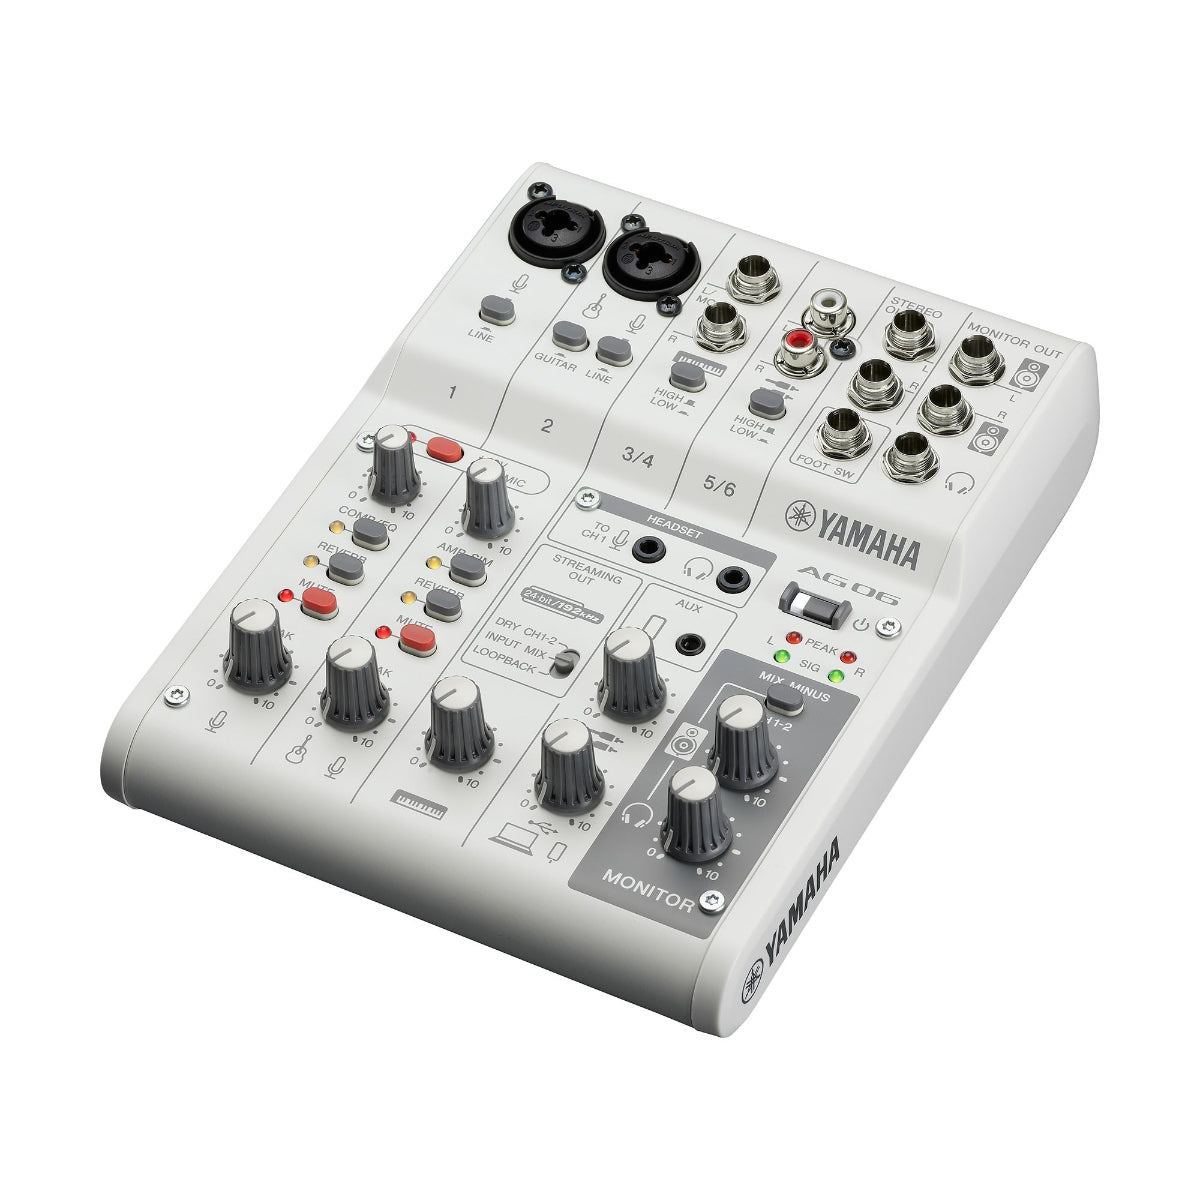 Yamaha AG06MK2 6-Channel Mixer and USB Audio Interface - White